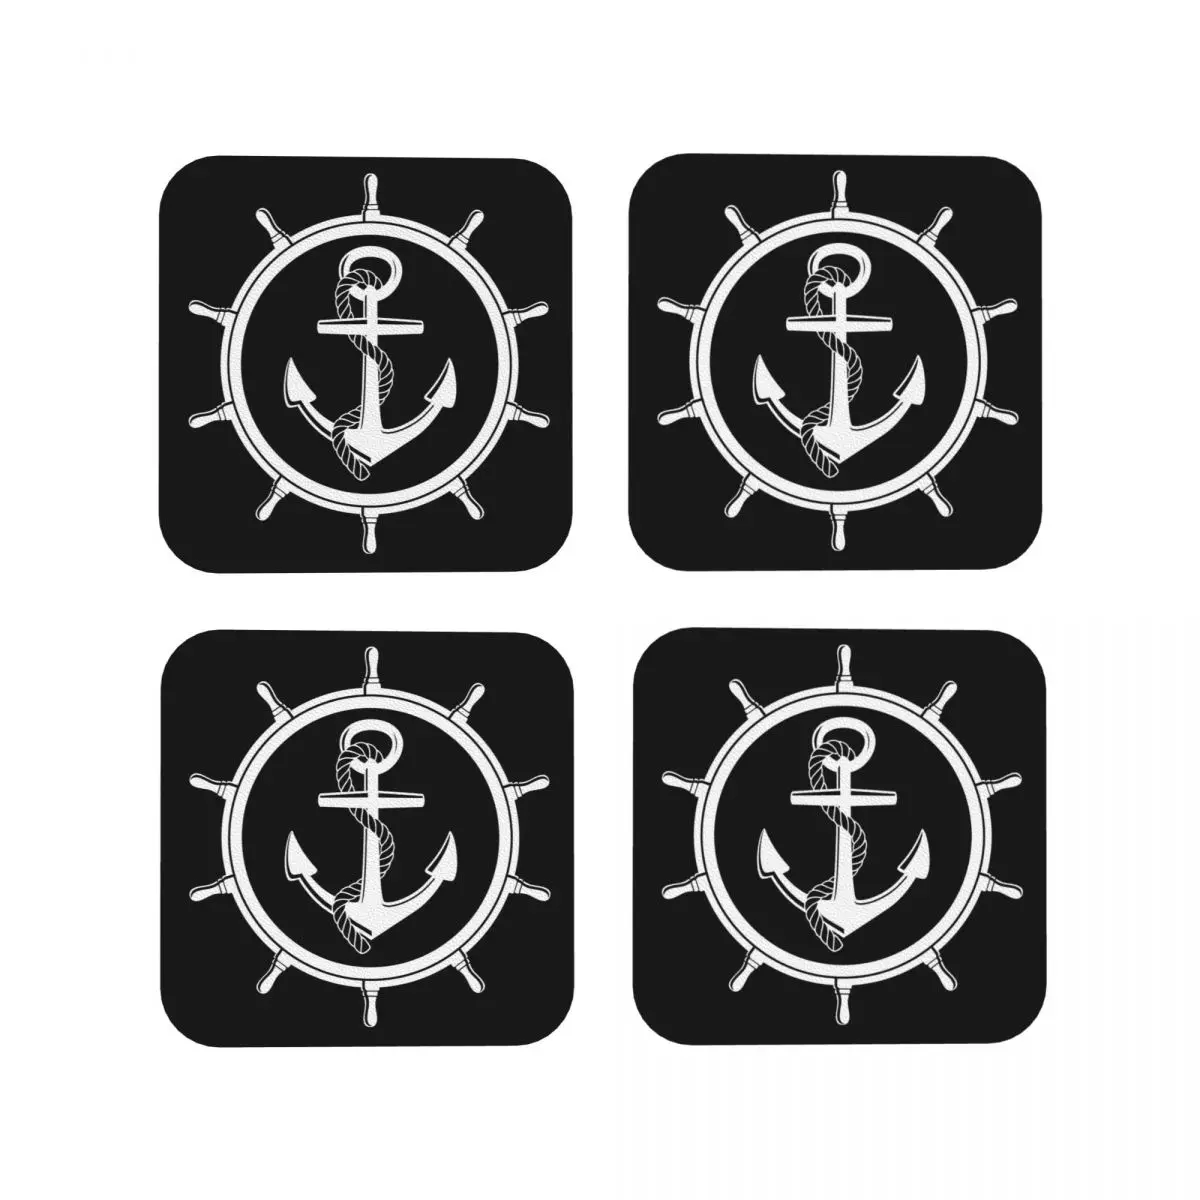 

Nautical Coaster Heat Resistant Mat Table Decoration & Accessories Utensils For Kitchen Table Placemats Napkins Coffee Mat